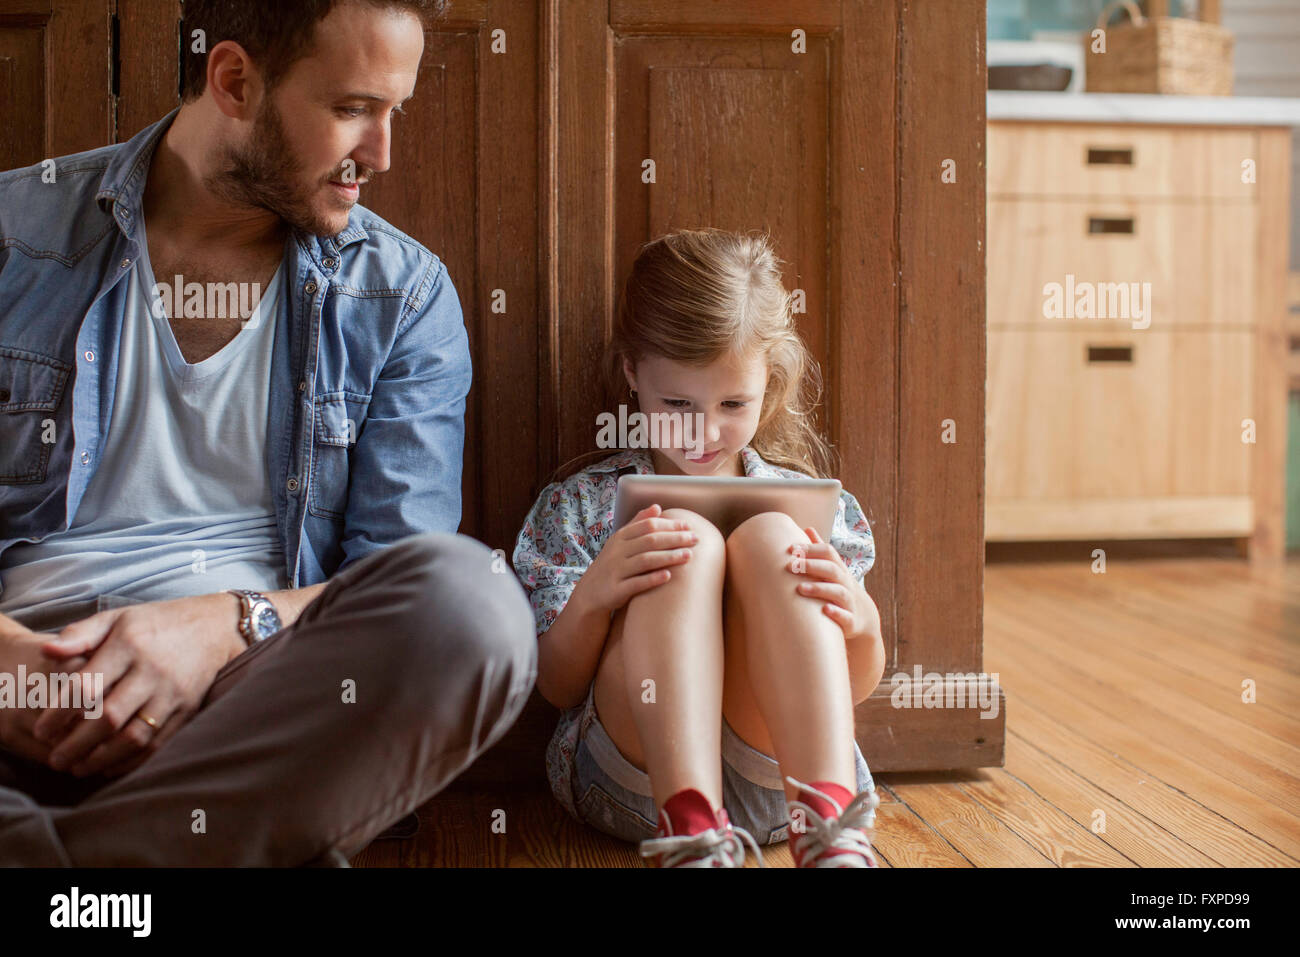 Father watching as daughter plays video game Stock Photo